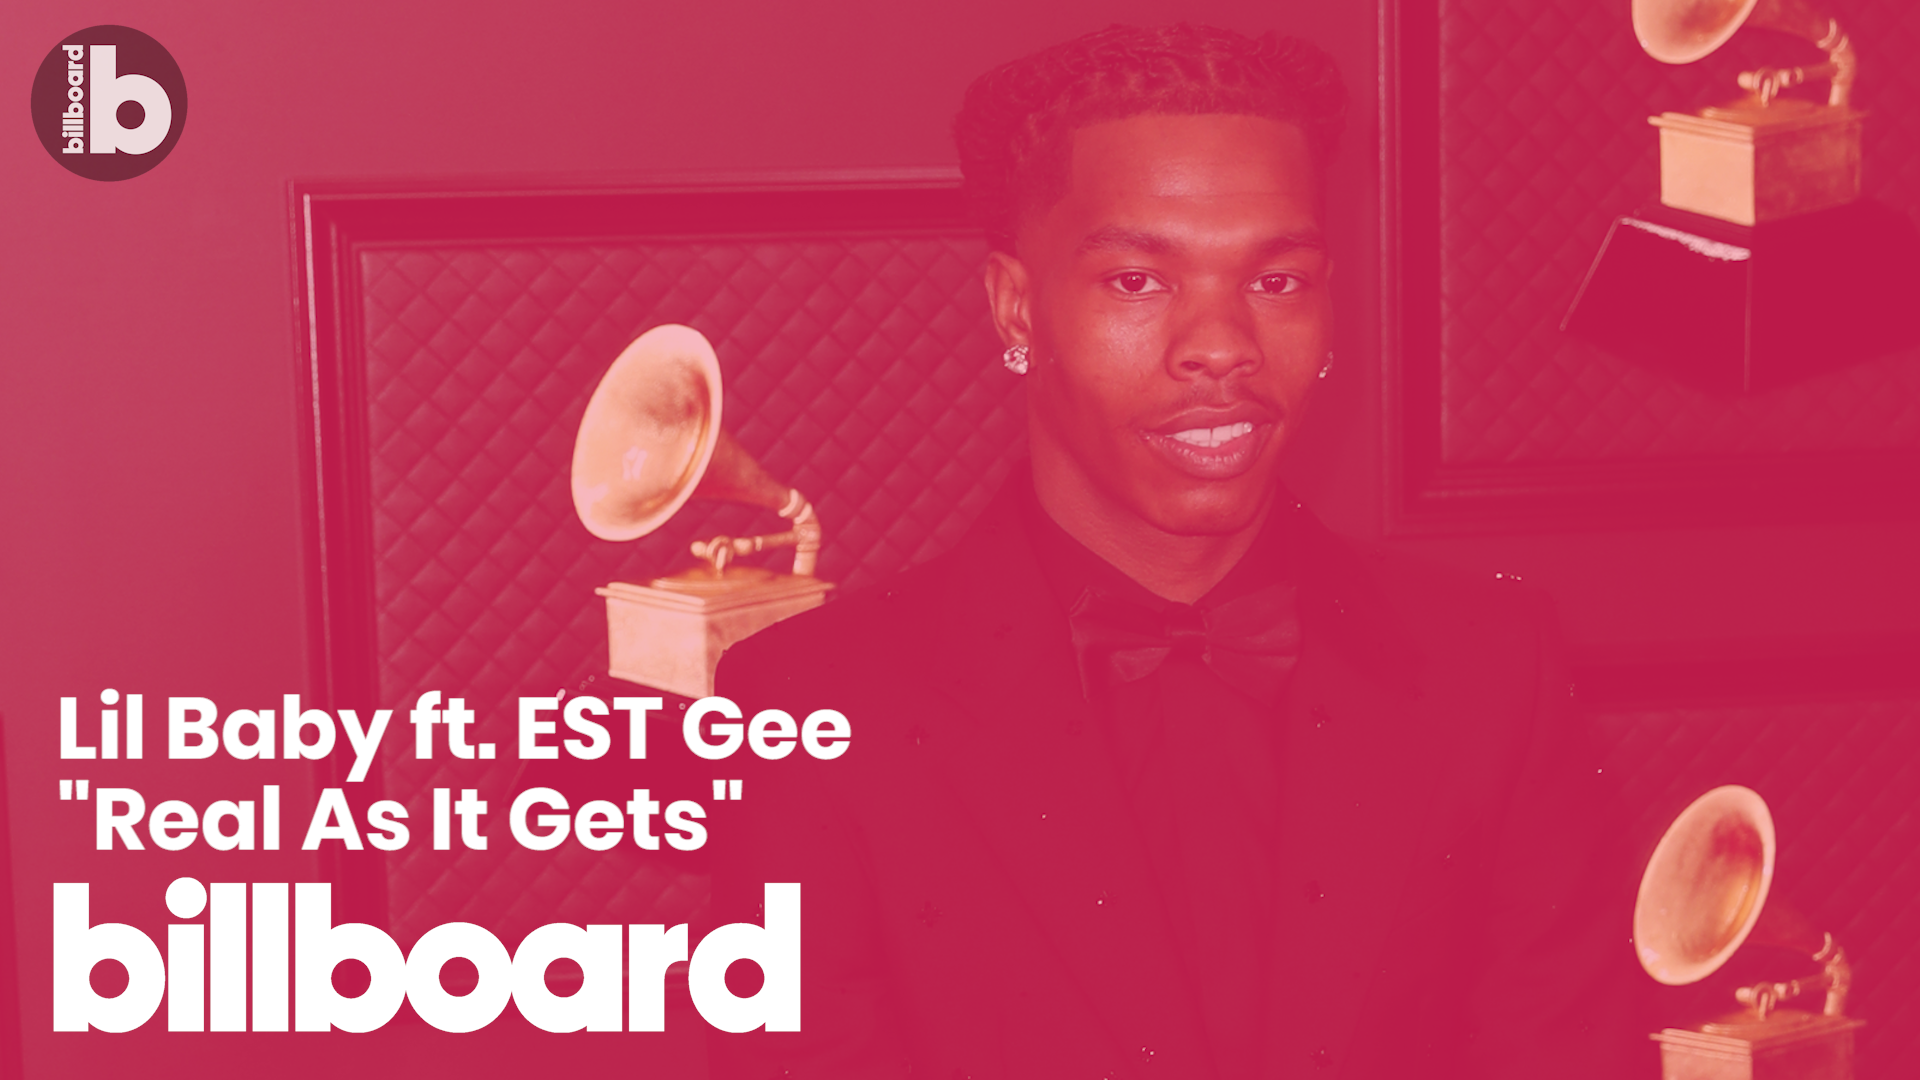 Lil Baby ft. EST Gee's Real As It Gets. Watch Now!